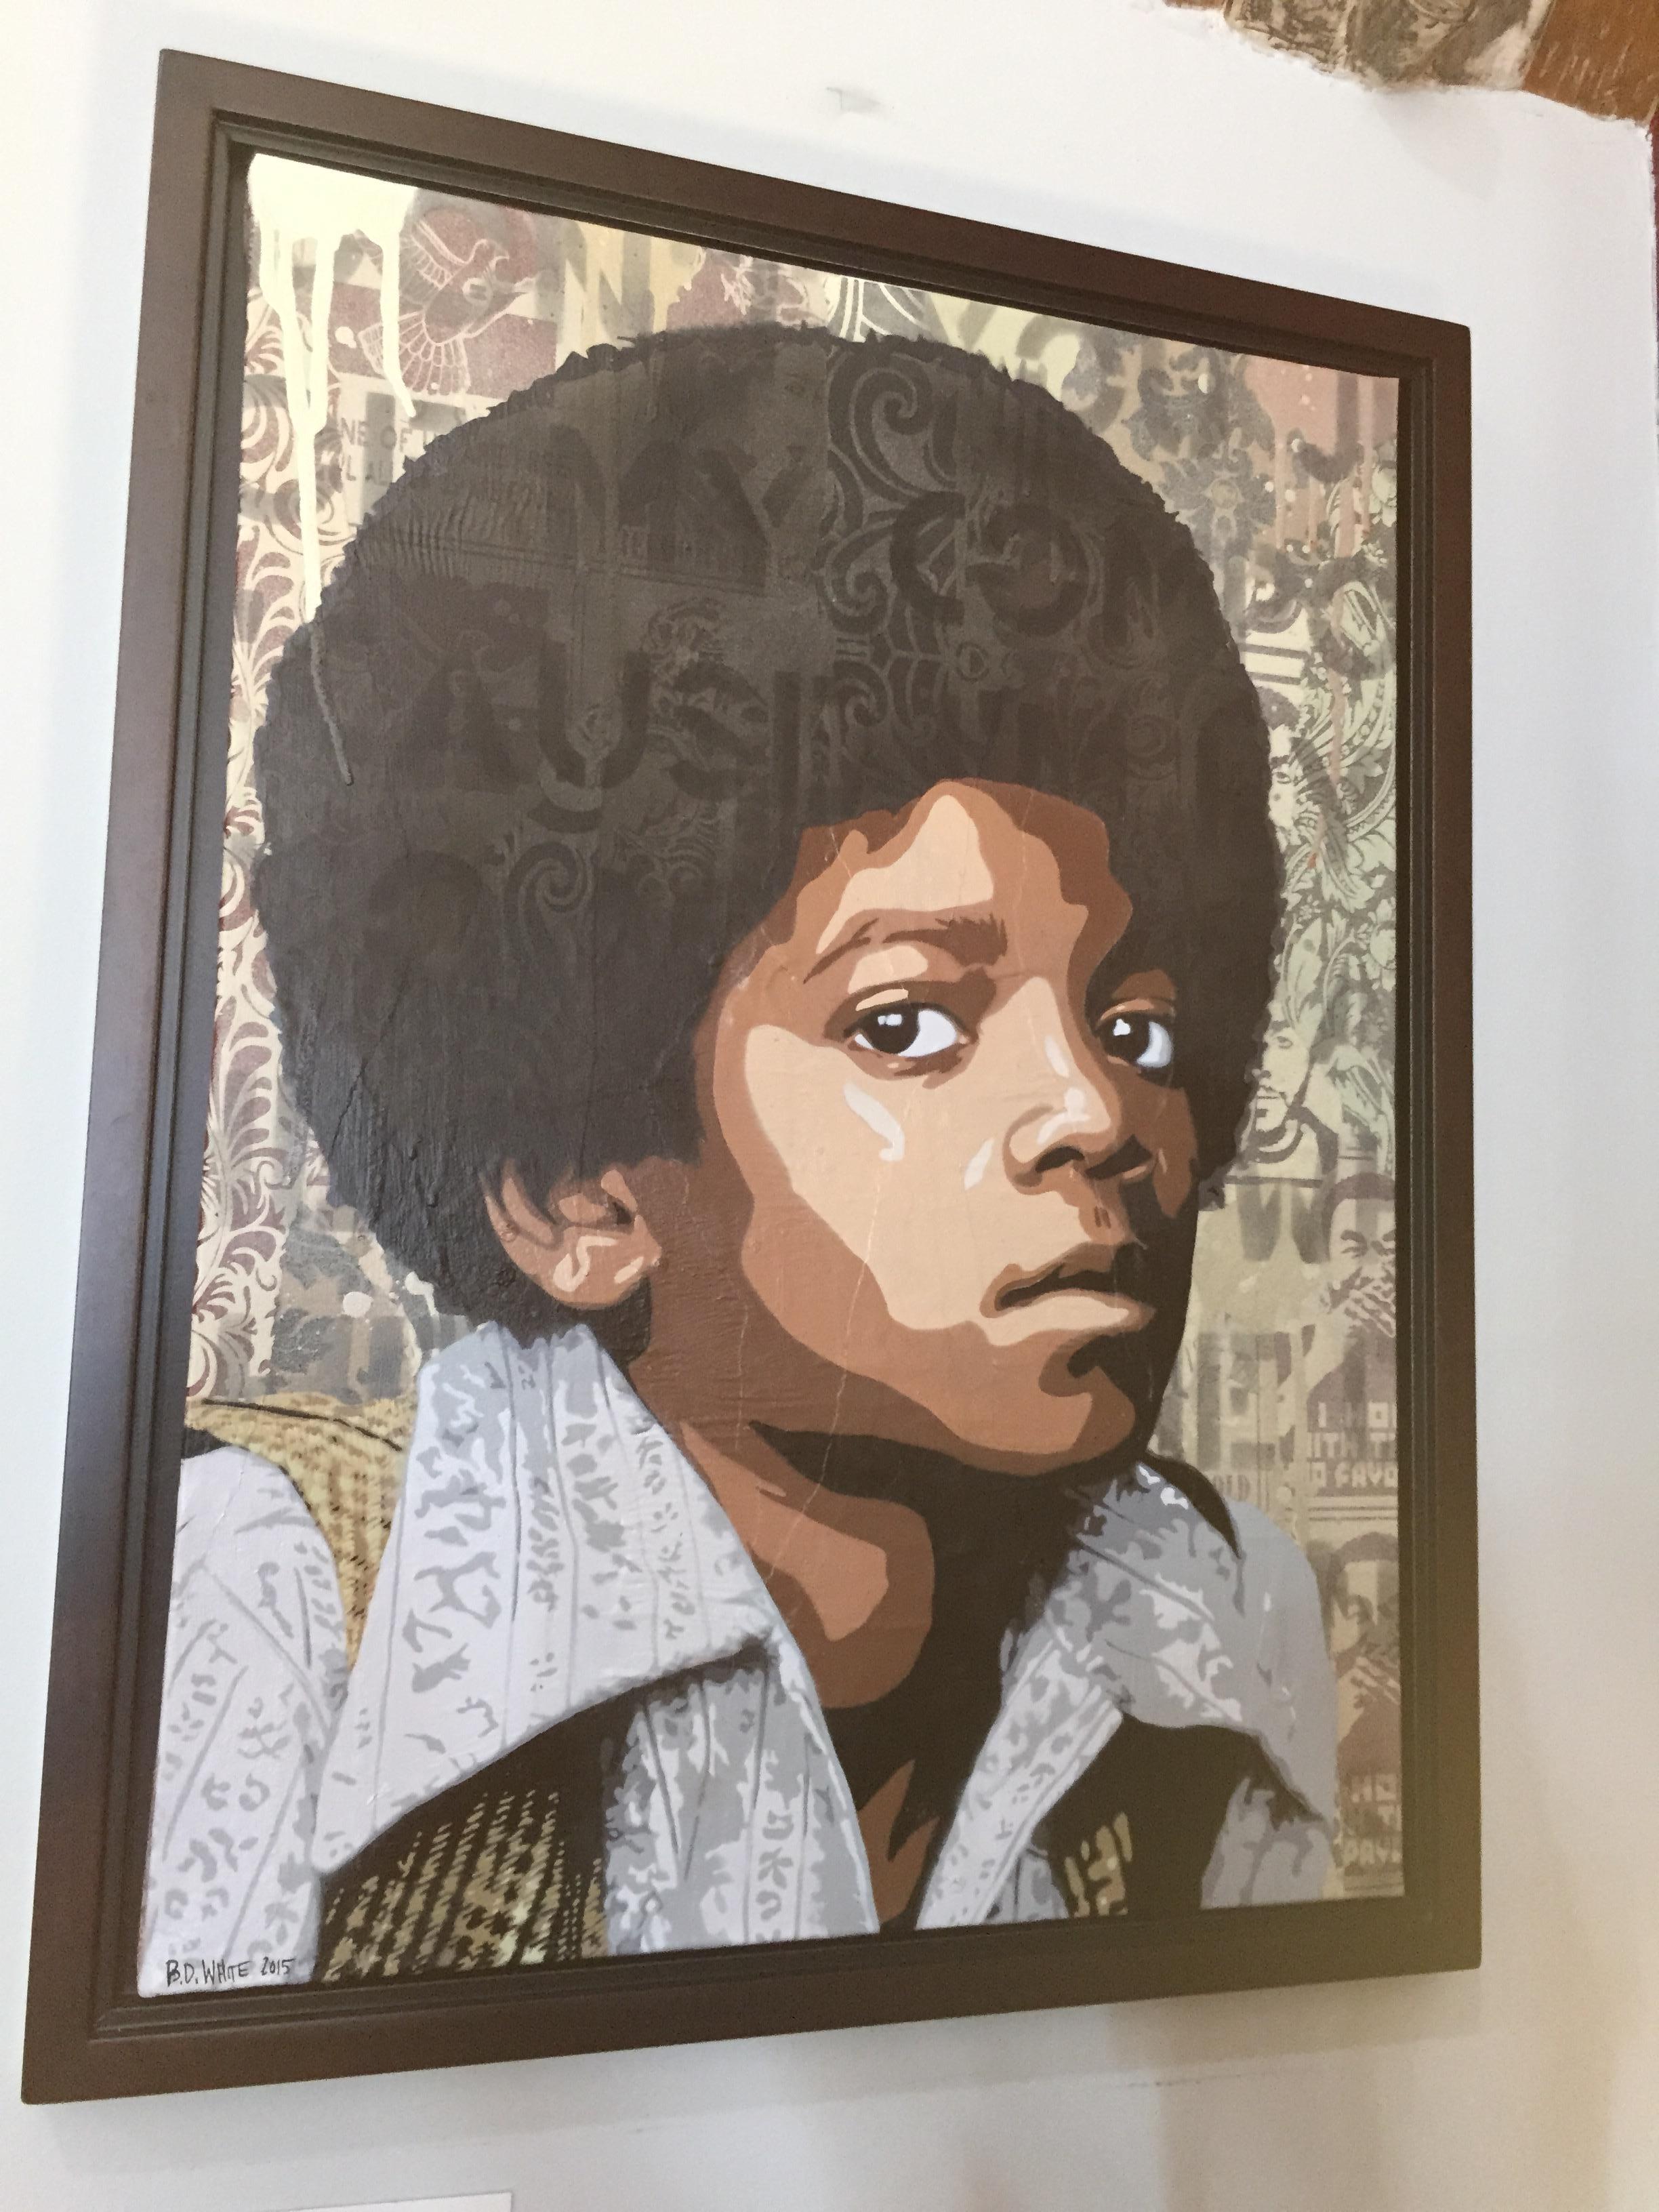 18 x 24 Framed Canvas

Stencil and Spray paint on Canvas

Rare portrait piece from the beginning of BD White's career as an artist